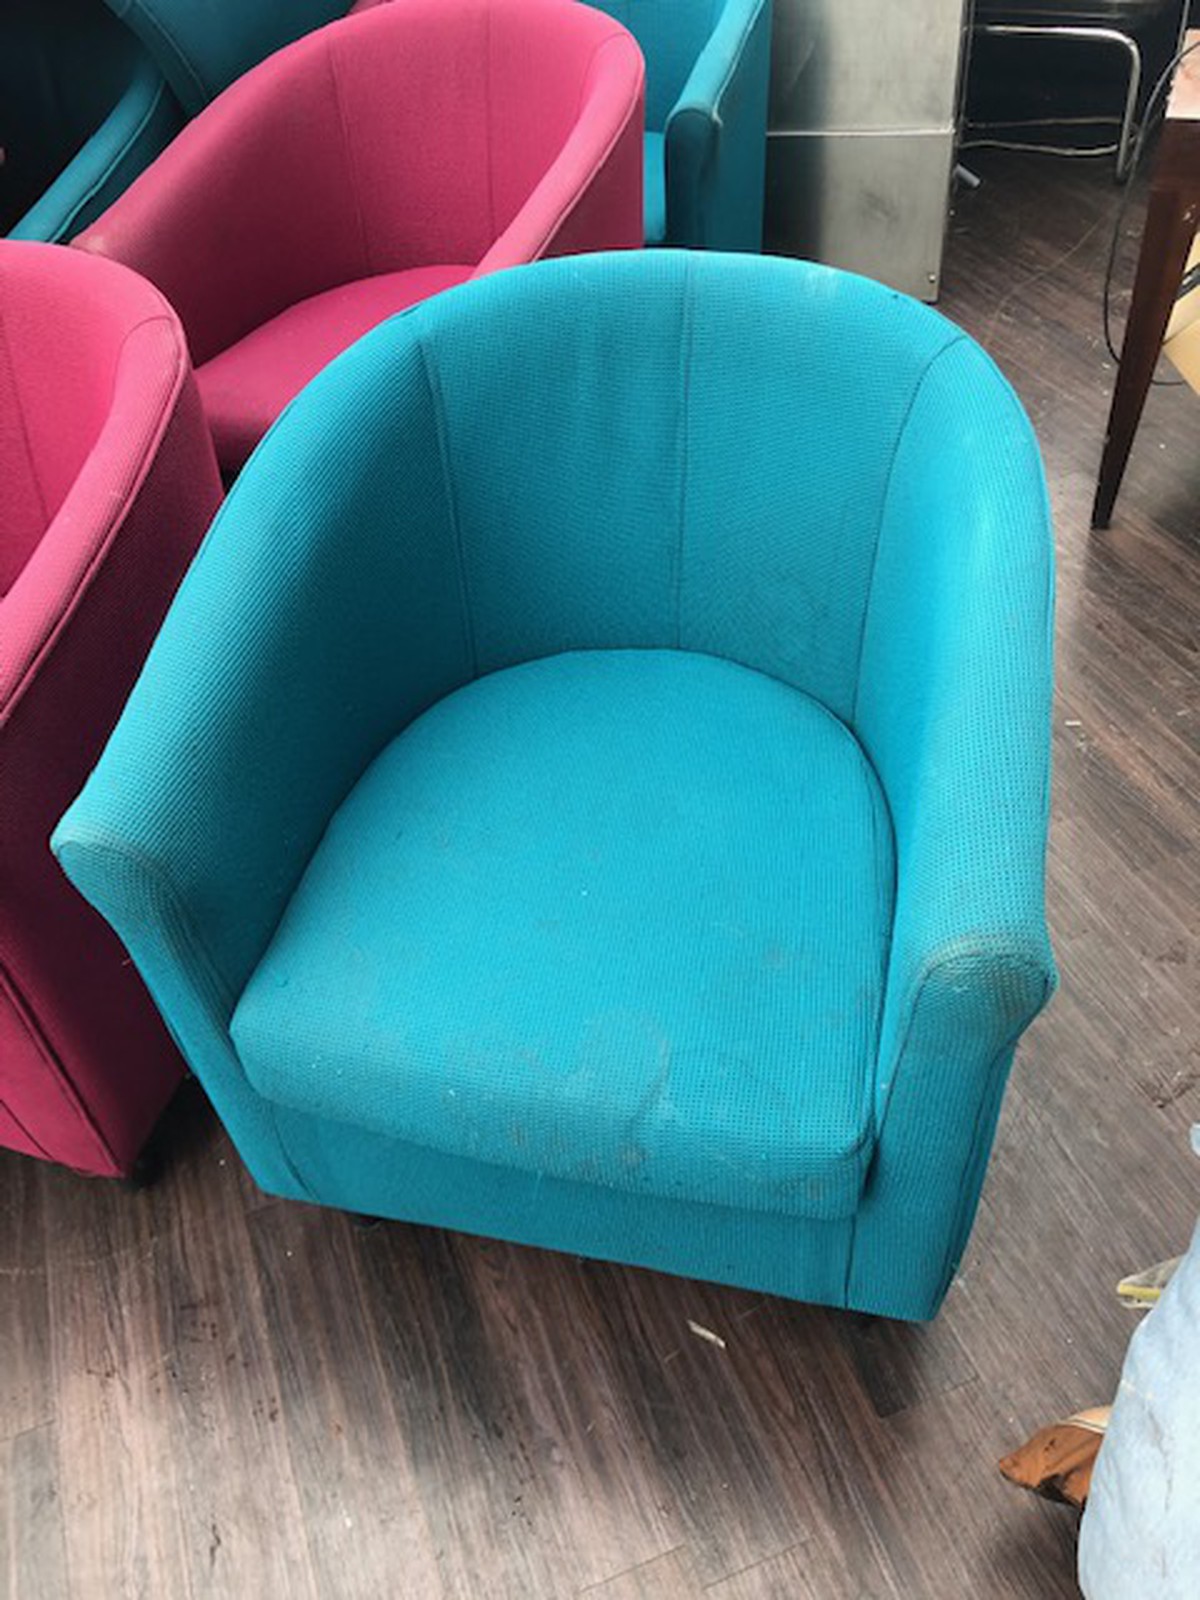 Secondhand Pub Equipment | Chairs | 9x Tub Chairs 2 Colours Blue And